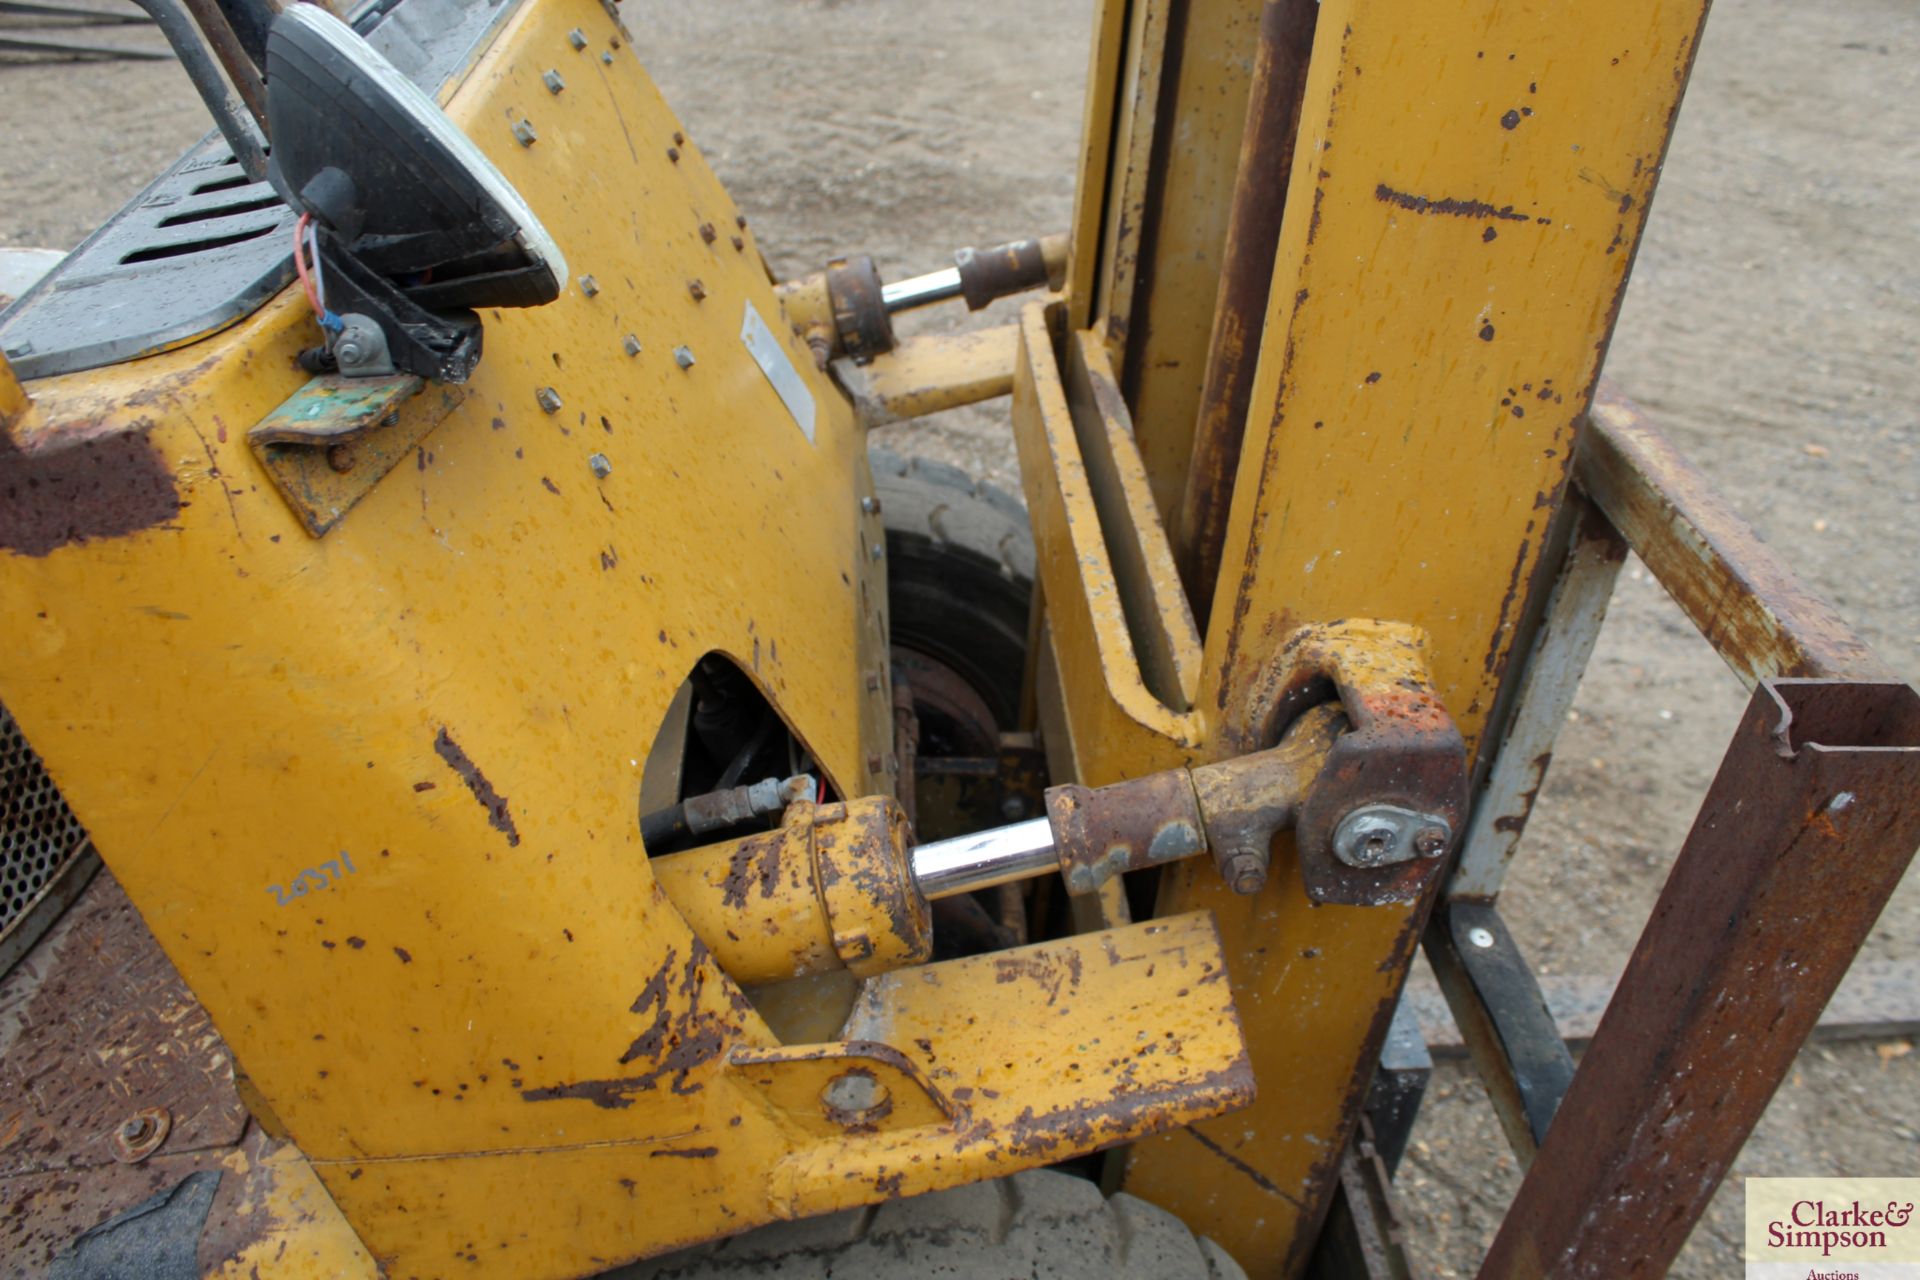 Toyota 02-2FD20 2T diesel forklift.4x366 hours. Vendor reports brakes need attention. V - Image 7 of 16